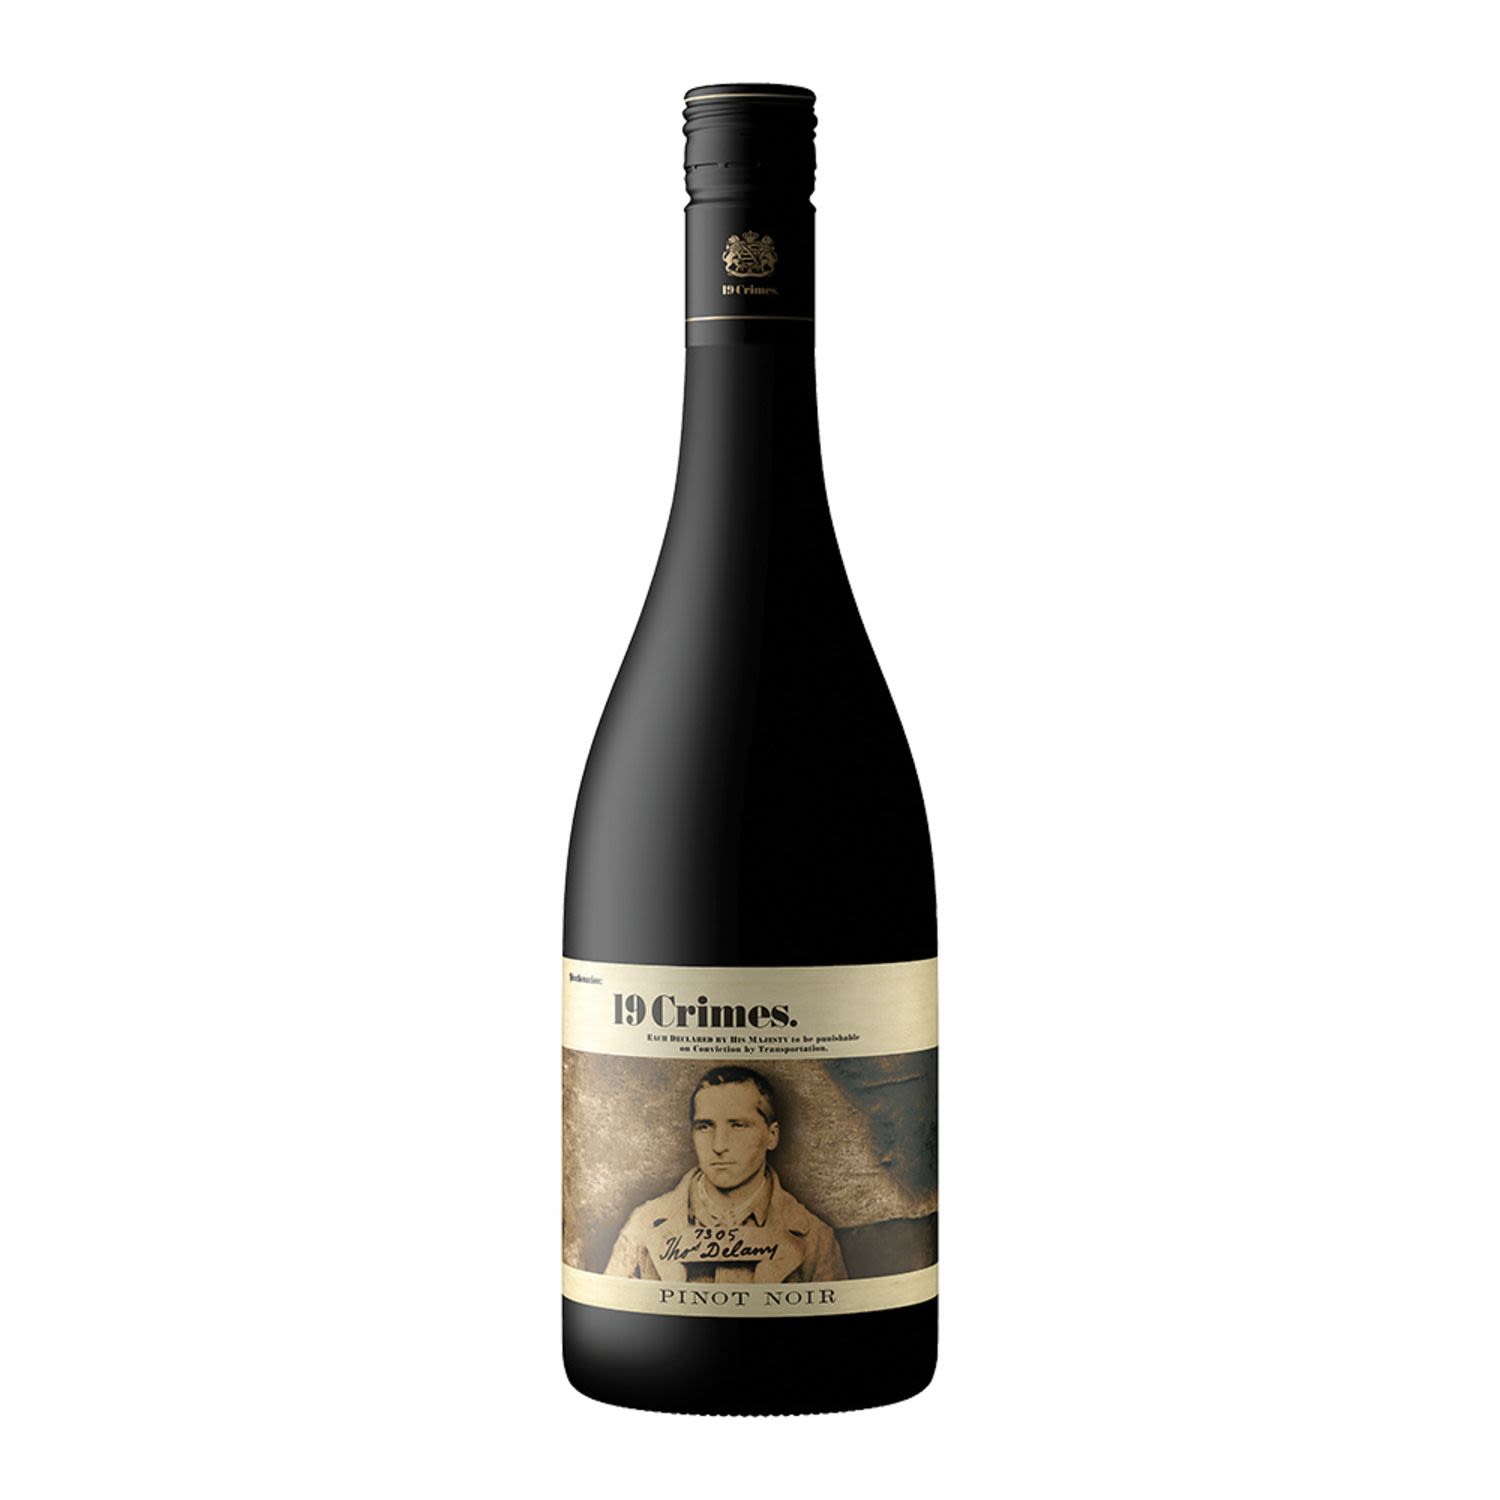 19 Crimes Pinot Noir - Medium bodied with soft, round tannins, cherry and strawberry fruit sweetness which complements the vanilla and spice oak undertones. All these elements combined create a well-balanced, enjoyable wine with a long finish.<br /> <br />Alcohol Volume: 13.50%<br /><br />Pack Format: 6 Pack<br /><br />Standard Drinks: 7.7</br /><br />Pack Type: Bottle<br /><br />Country of Origin: Australia<br /><br />Region: South Eastern Australia<br /><br />Vintage: Vintages Vary<br />